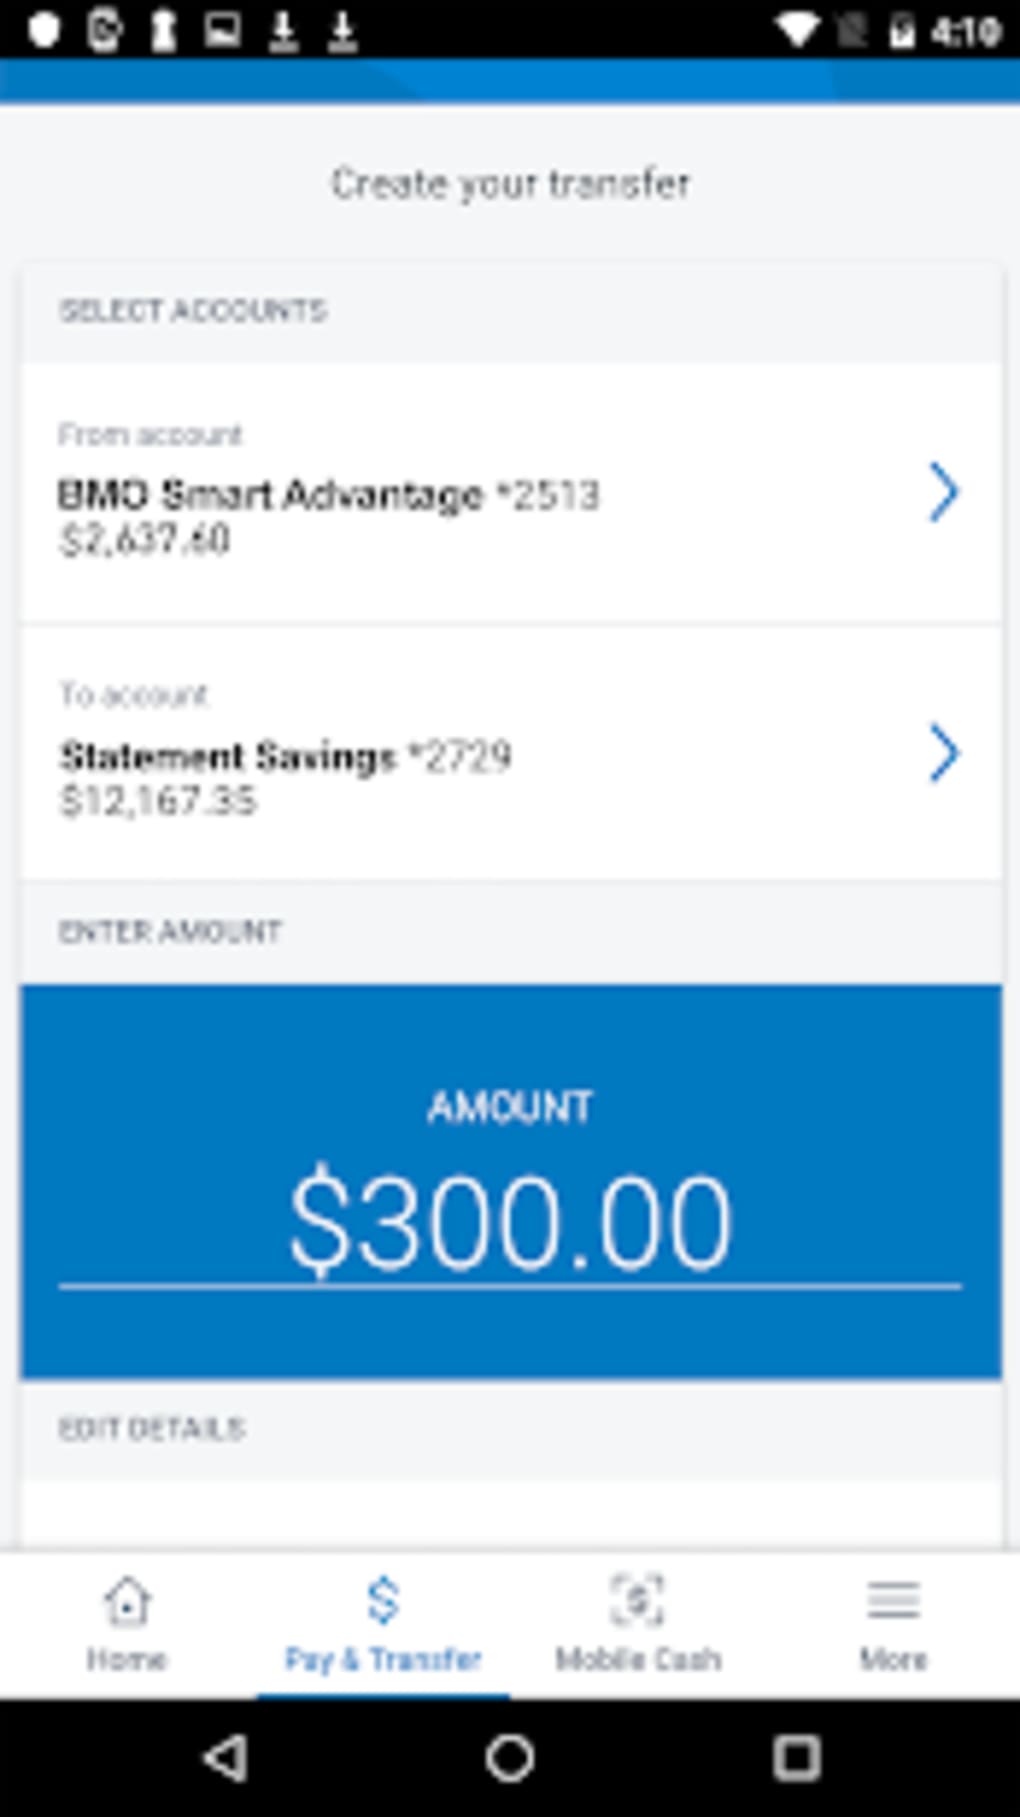 BMO Digital Banking for Android - Download